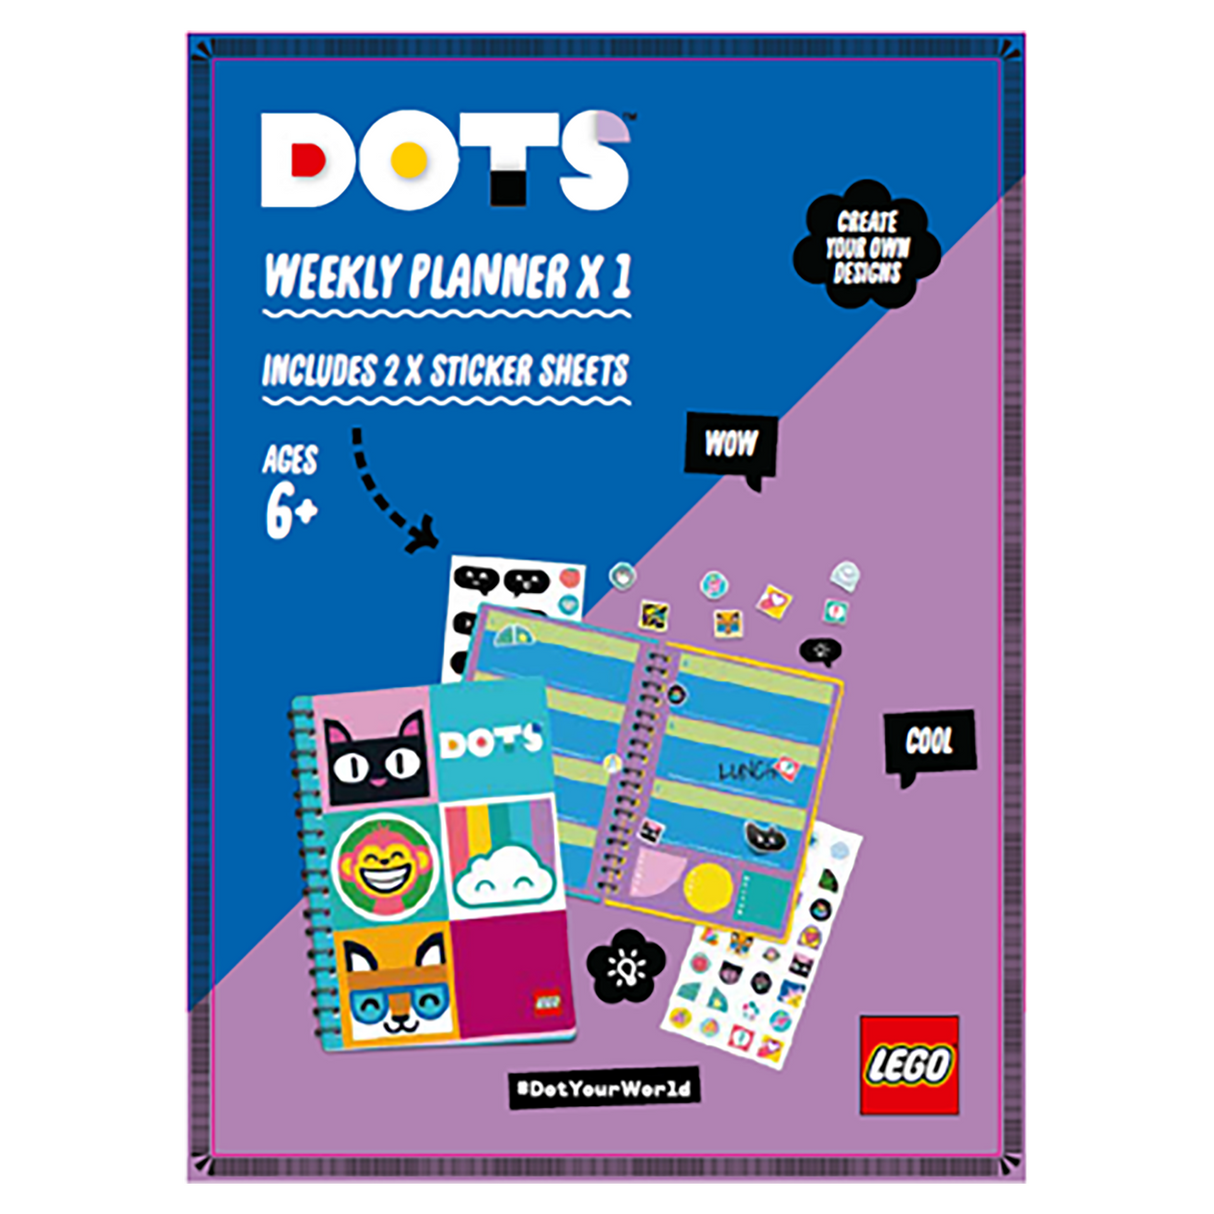 LEGO DOTS Weekly Planner